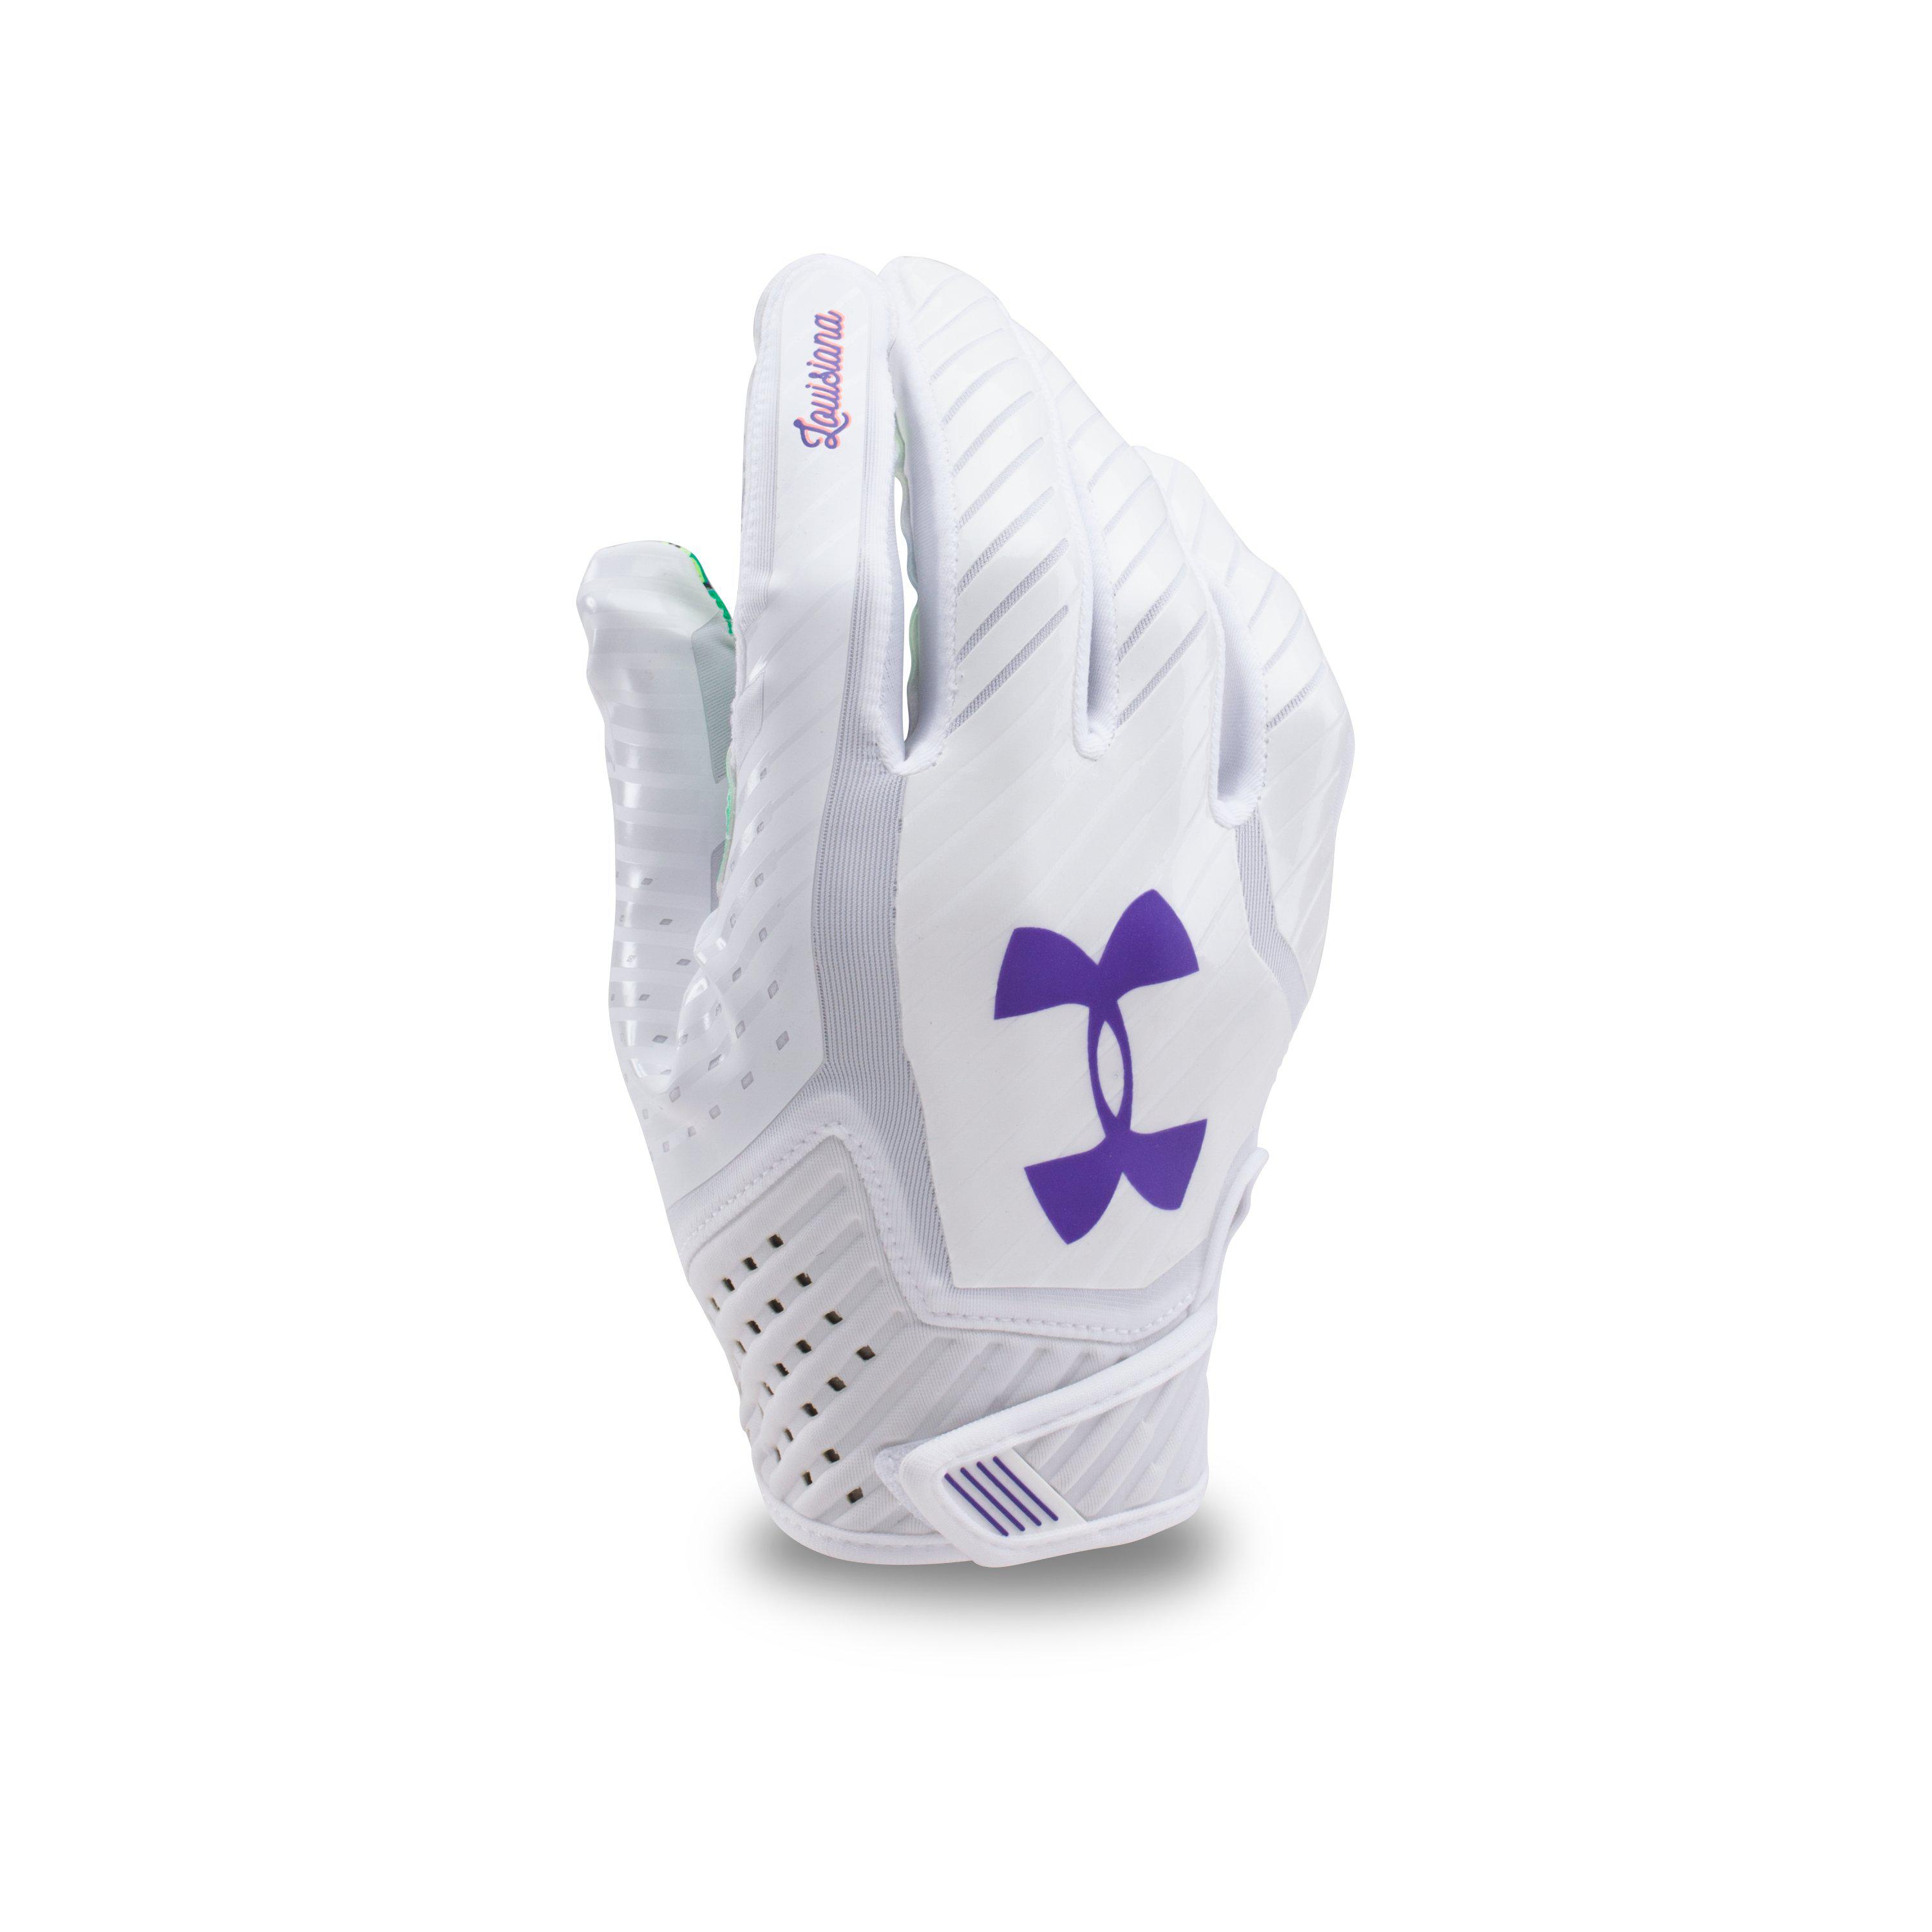 Under Armour Limited Edition Football Gloves Online, 54% OFF | www 